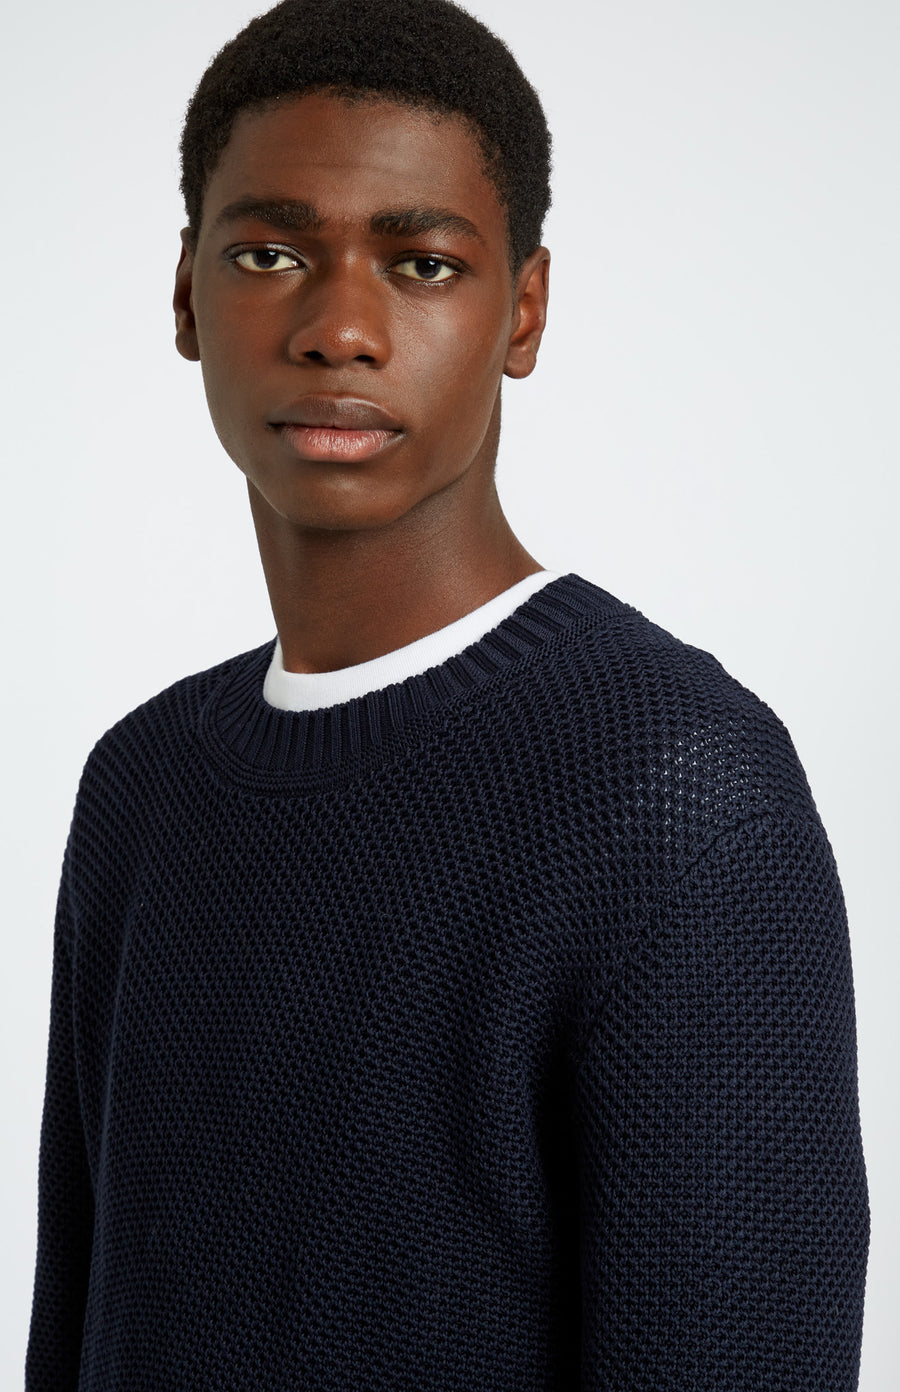 Men's Jumpers, Knitted & Cotton Jumpers